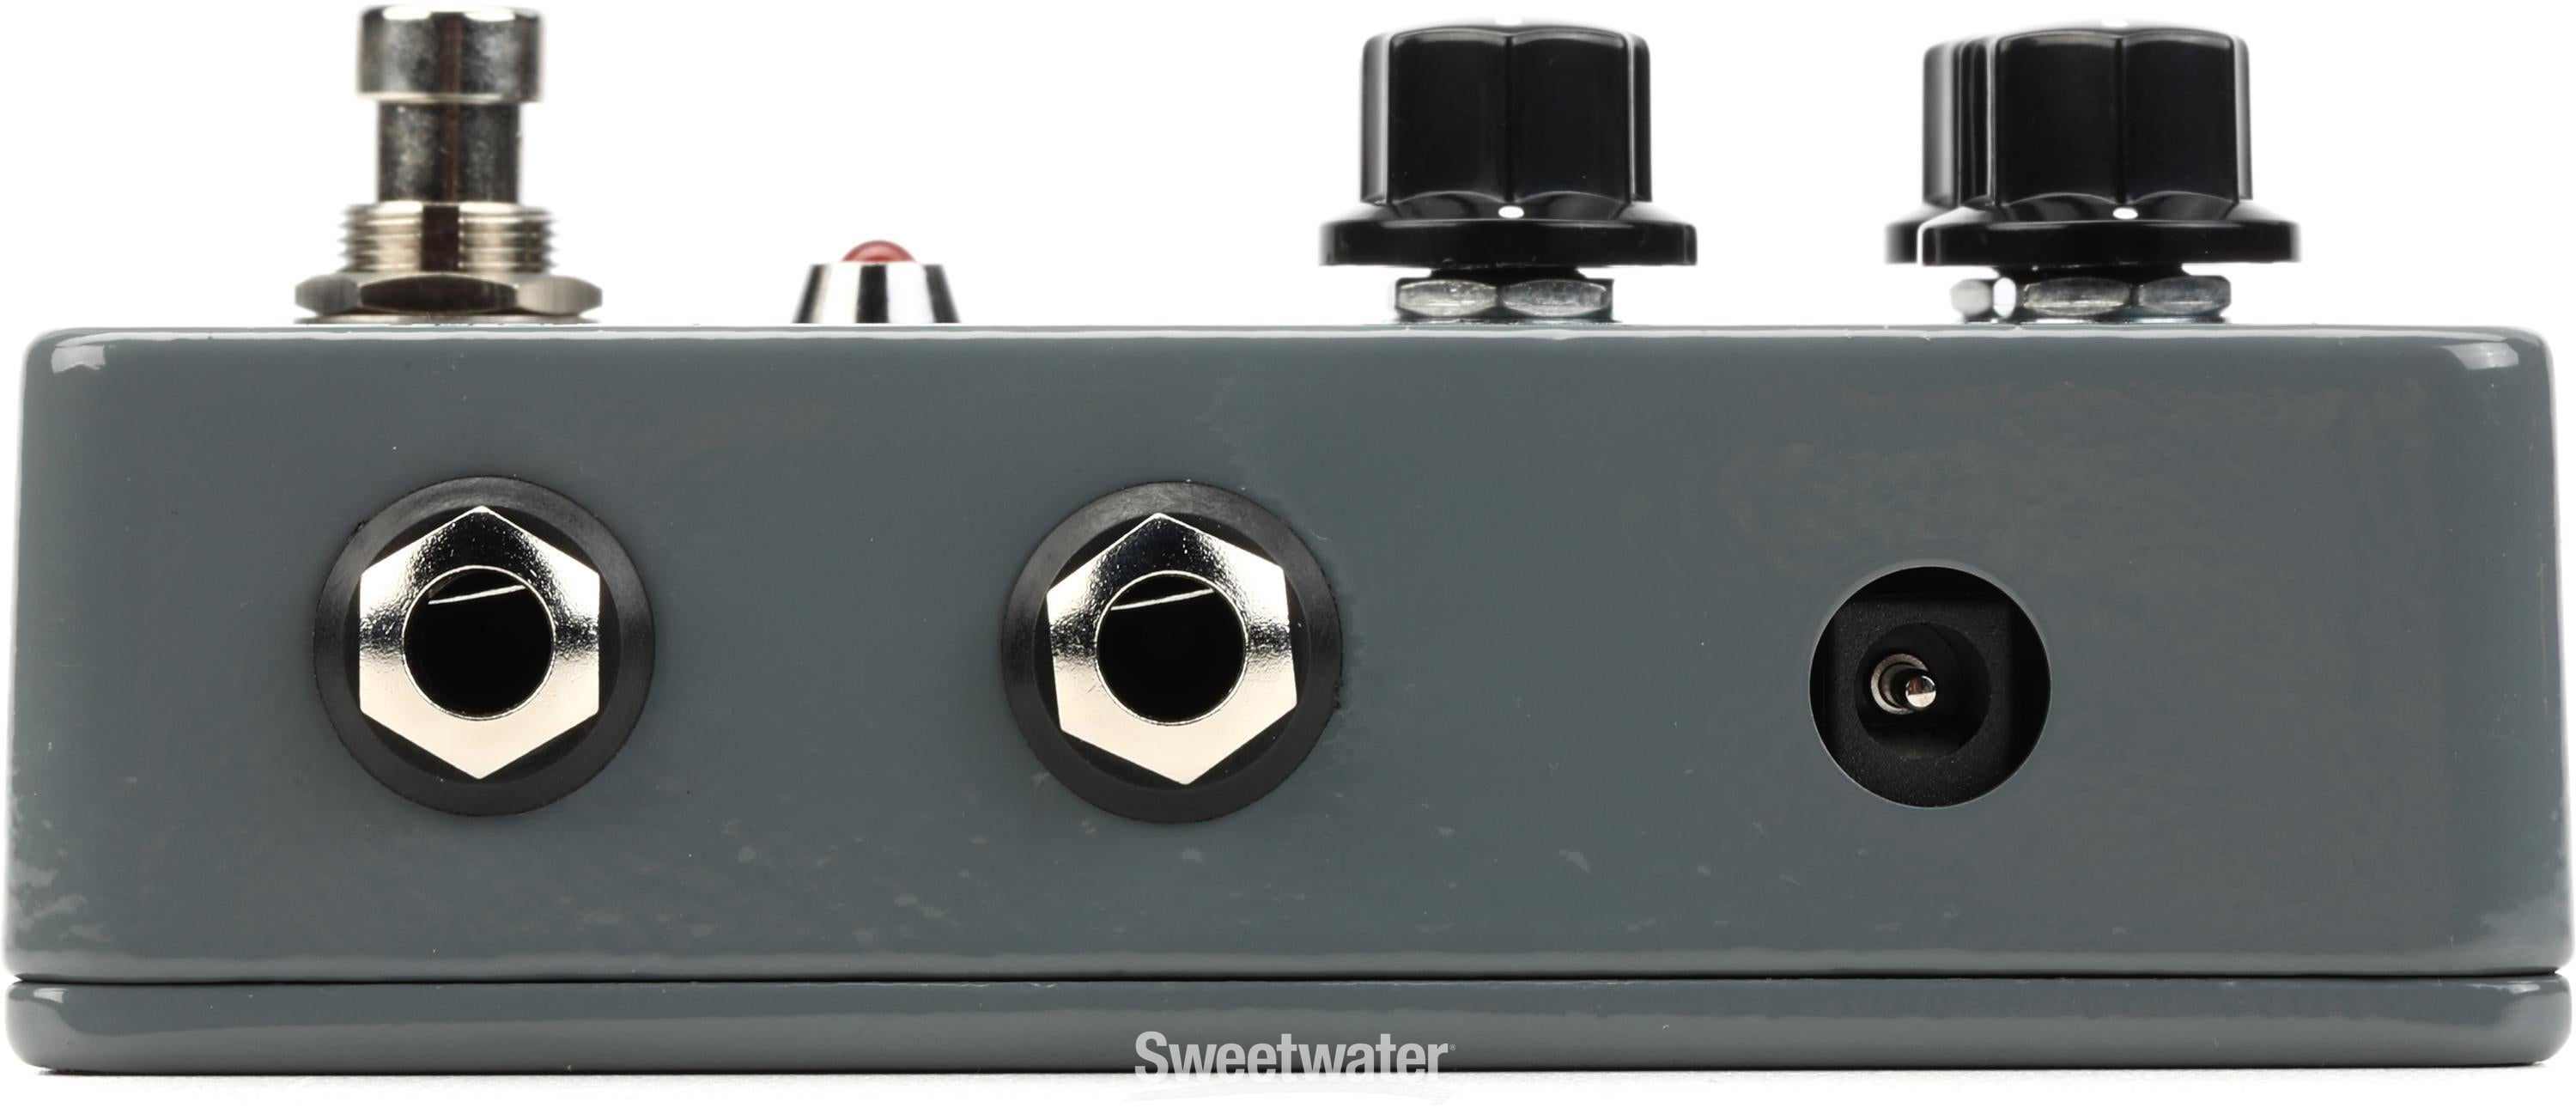 Benson Amps Preamp Pedal | Sweetwater